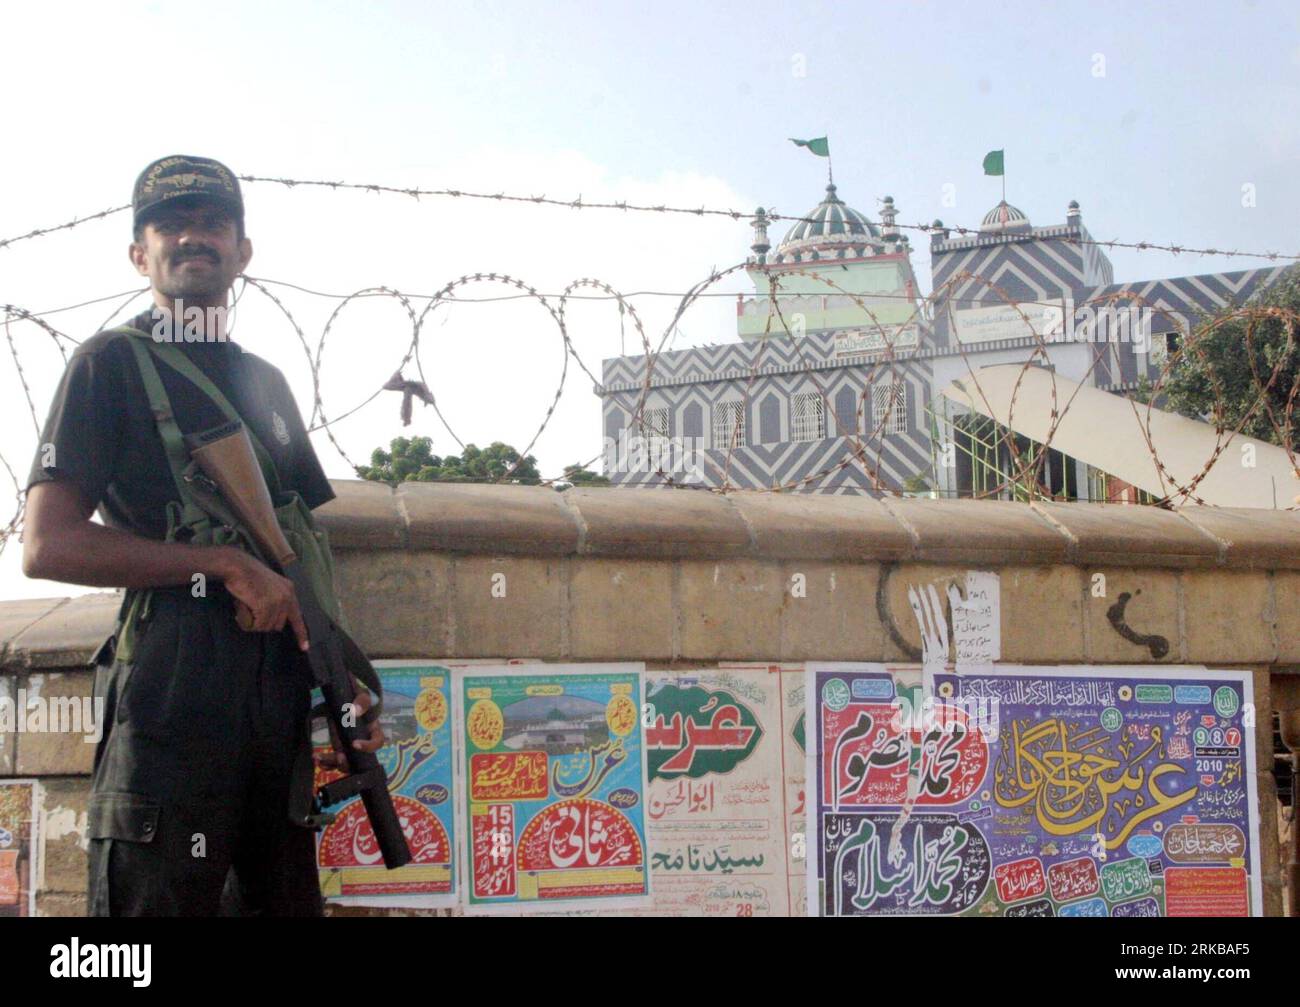 Bildnummer: 54524796  Datum: 10.10.2010  Copyright: imago/Xinhua (101010) -- KARACHI, Oct. 10, 2010 (Xinhua) -- A policeman guards at a shrine named Abdullah Shah Ghazi in the Cliffton area of Karachi, Pakistan, Oct. 10, 2010. At least 14 were killed and 70 others injured in two suicide blasts that took place Thursday night at the shrine of Karachi. (Xinhua/Arshad)(zf) PAKISTAN-KARACHI-SUICIDE ATTACK-SECURITY ALERT PUBLICATIONxNOTxINxCHN Gesellschaft kbdig xkg 2010 quer o0 Polizei    Bildnummer 54524796 Date 10 10 2010 Copyright Imago XINHUA  Karachi OCT 10 2010 XINHUA a Policeman Guards AT a Stock Photo